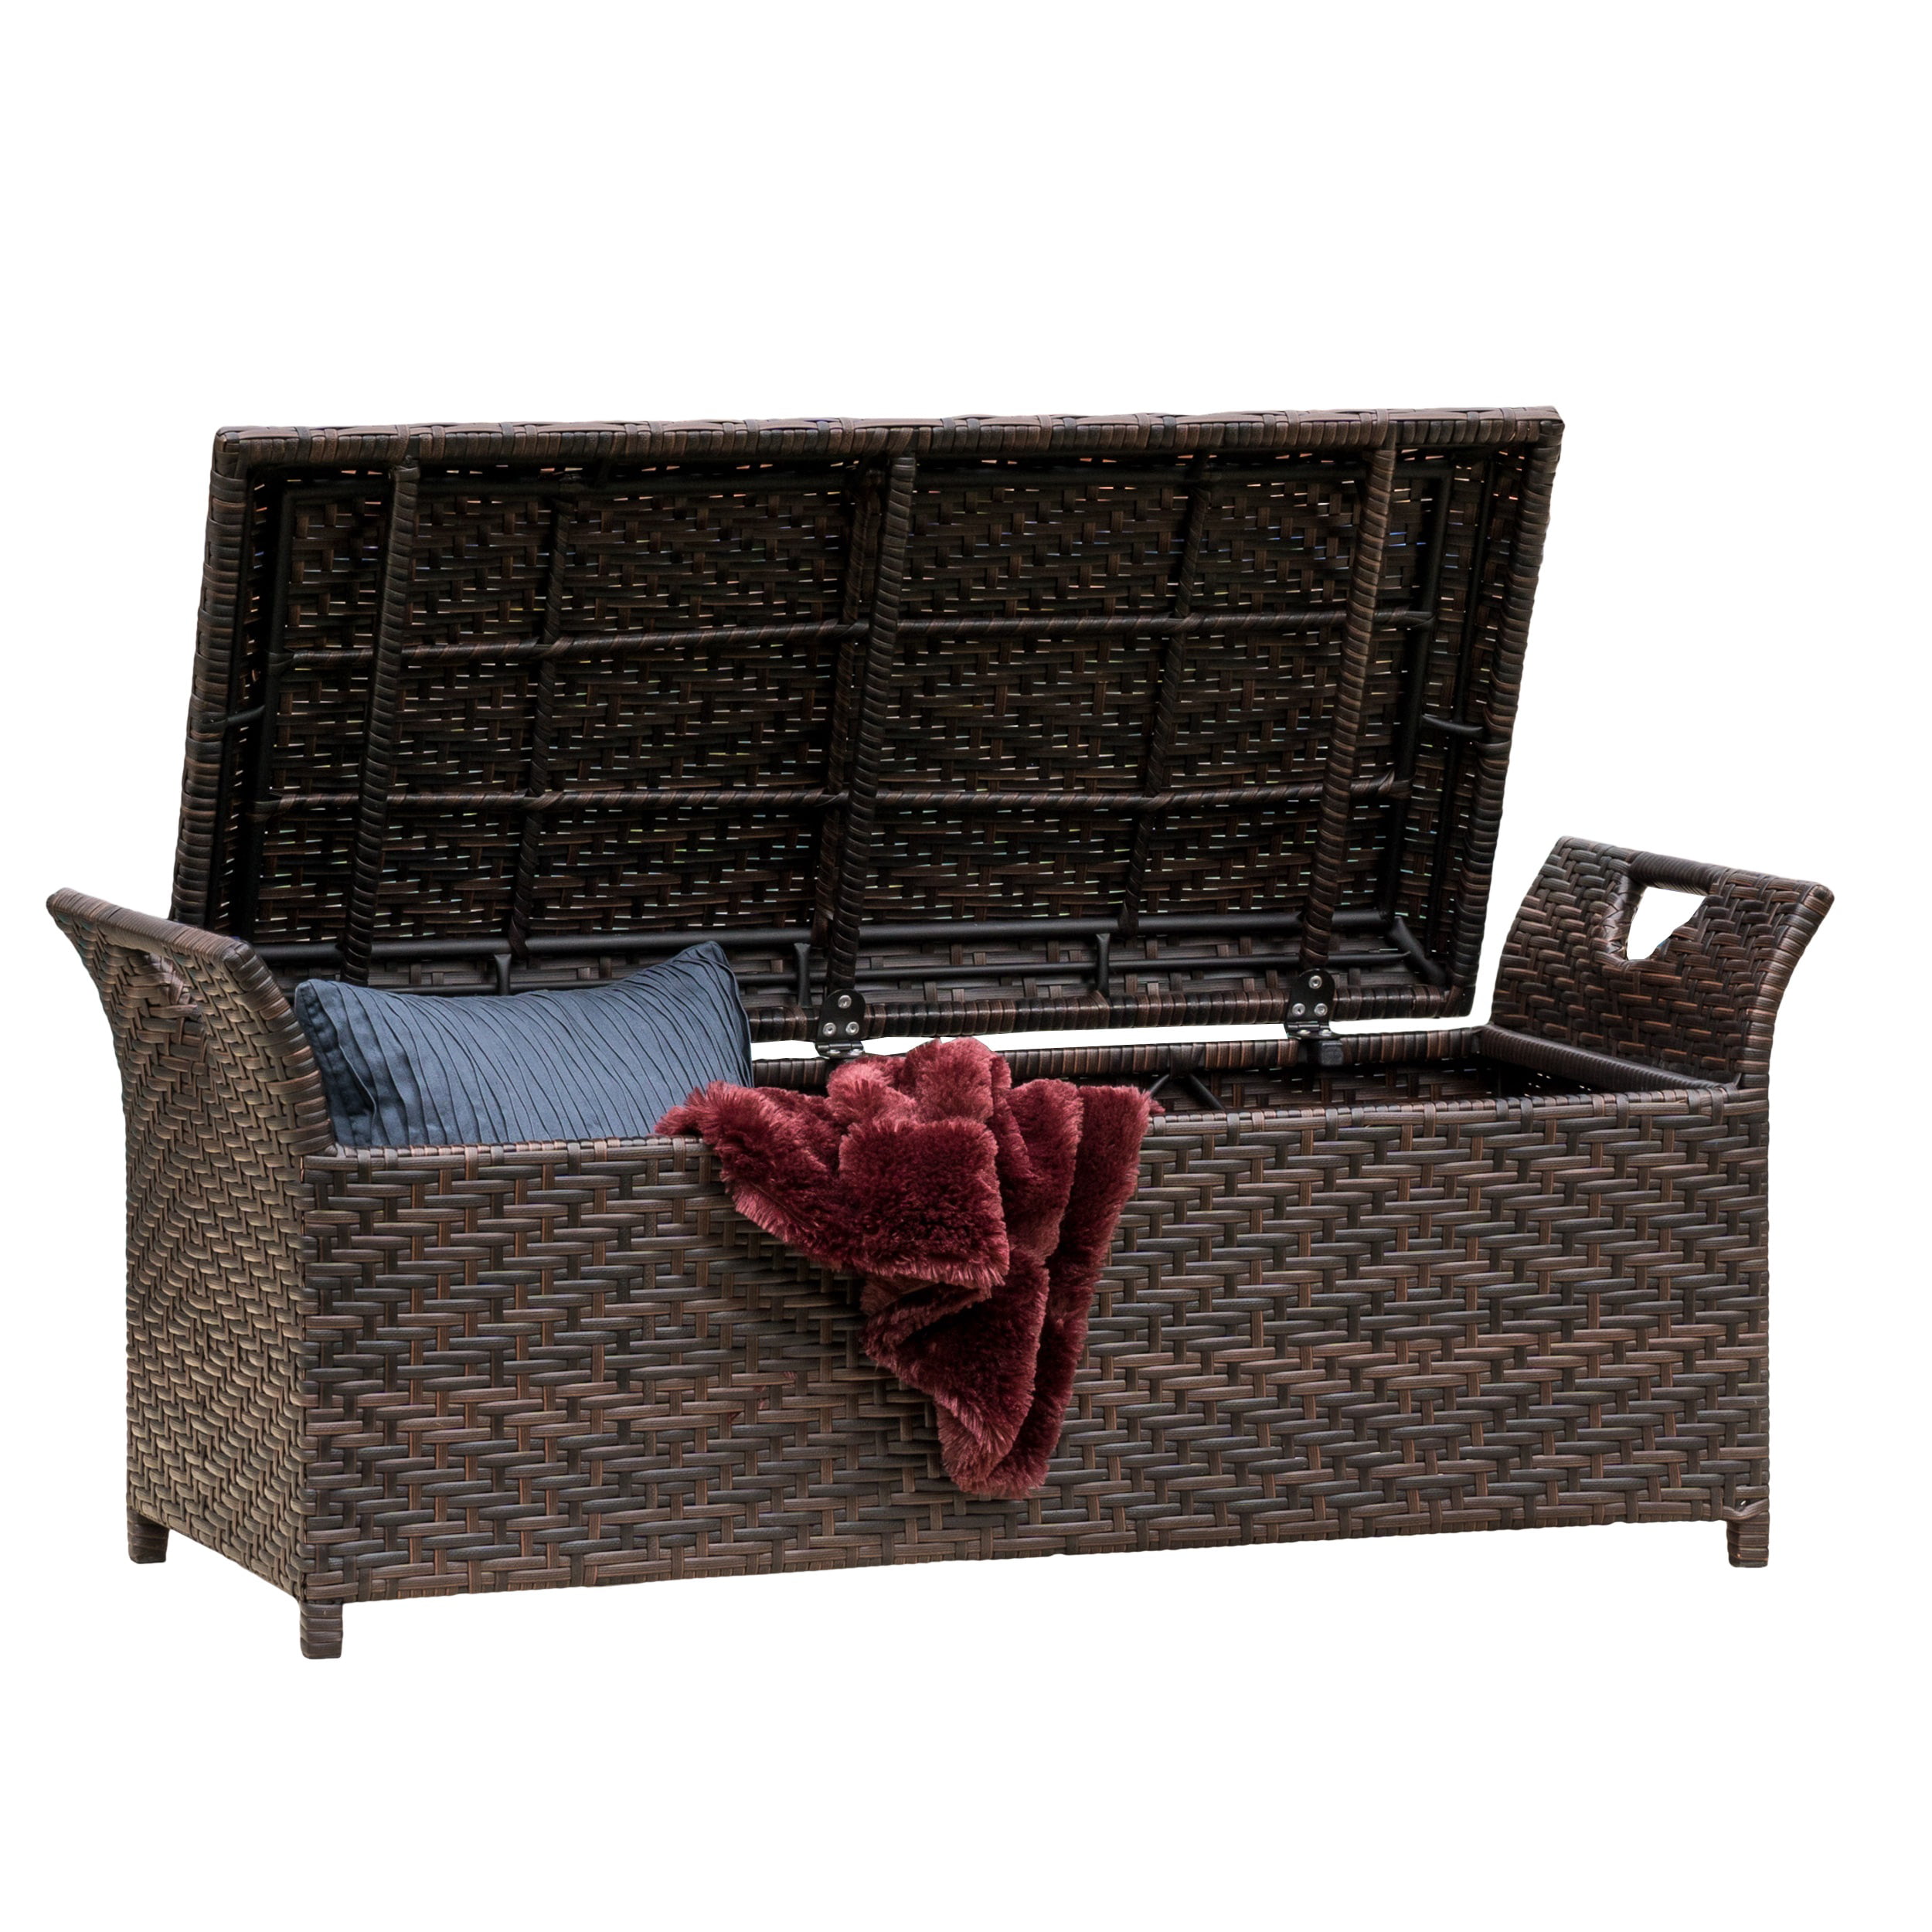 Danica Wing Outdoor Storage Bench, Outdoor Wicker Storage Bench With Cushion